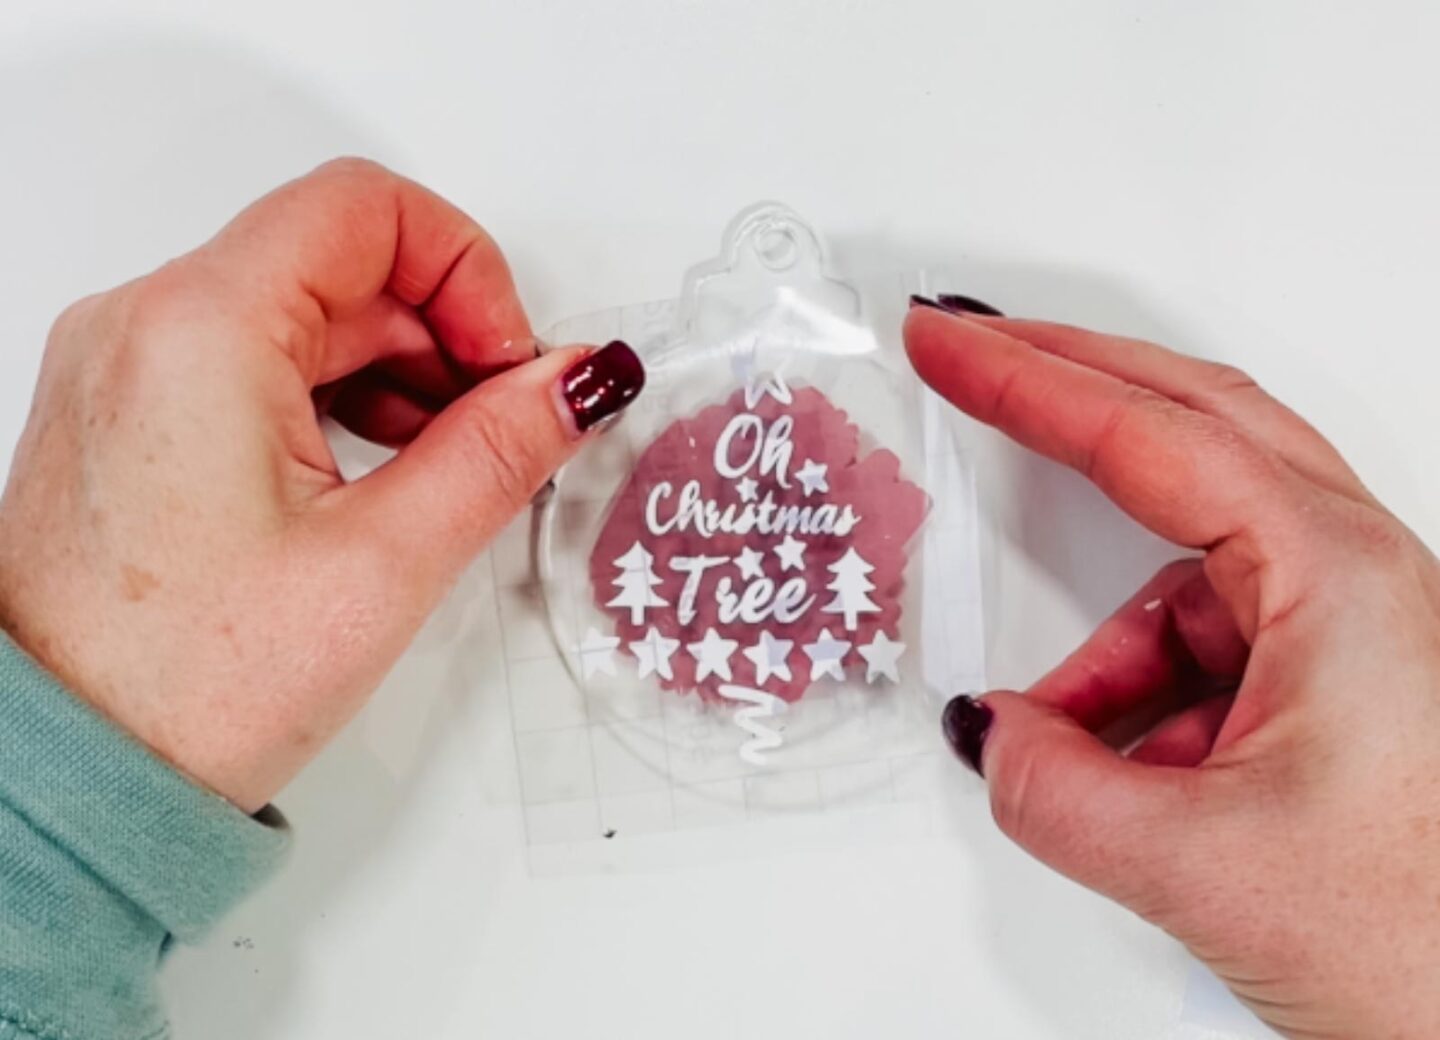 TRansfer the Christmas Tree to your acryclic bauble